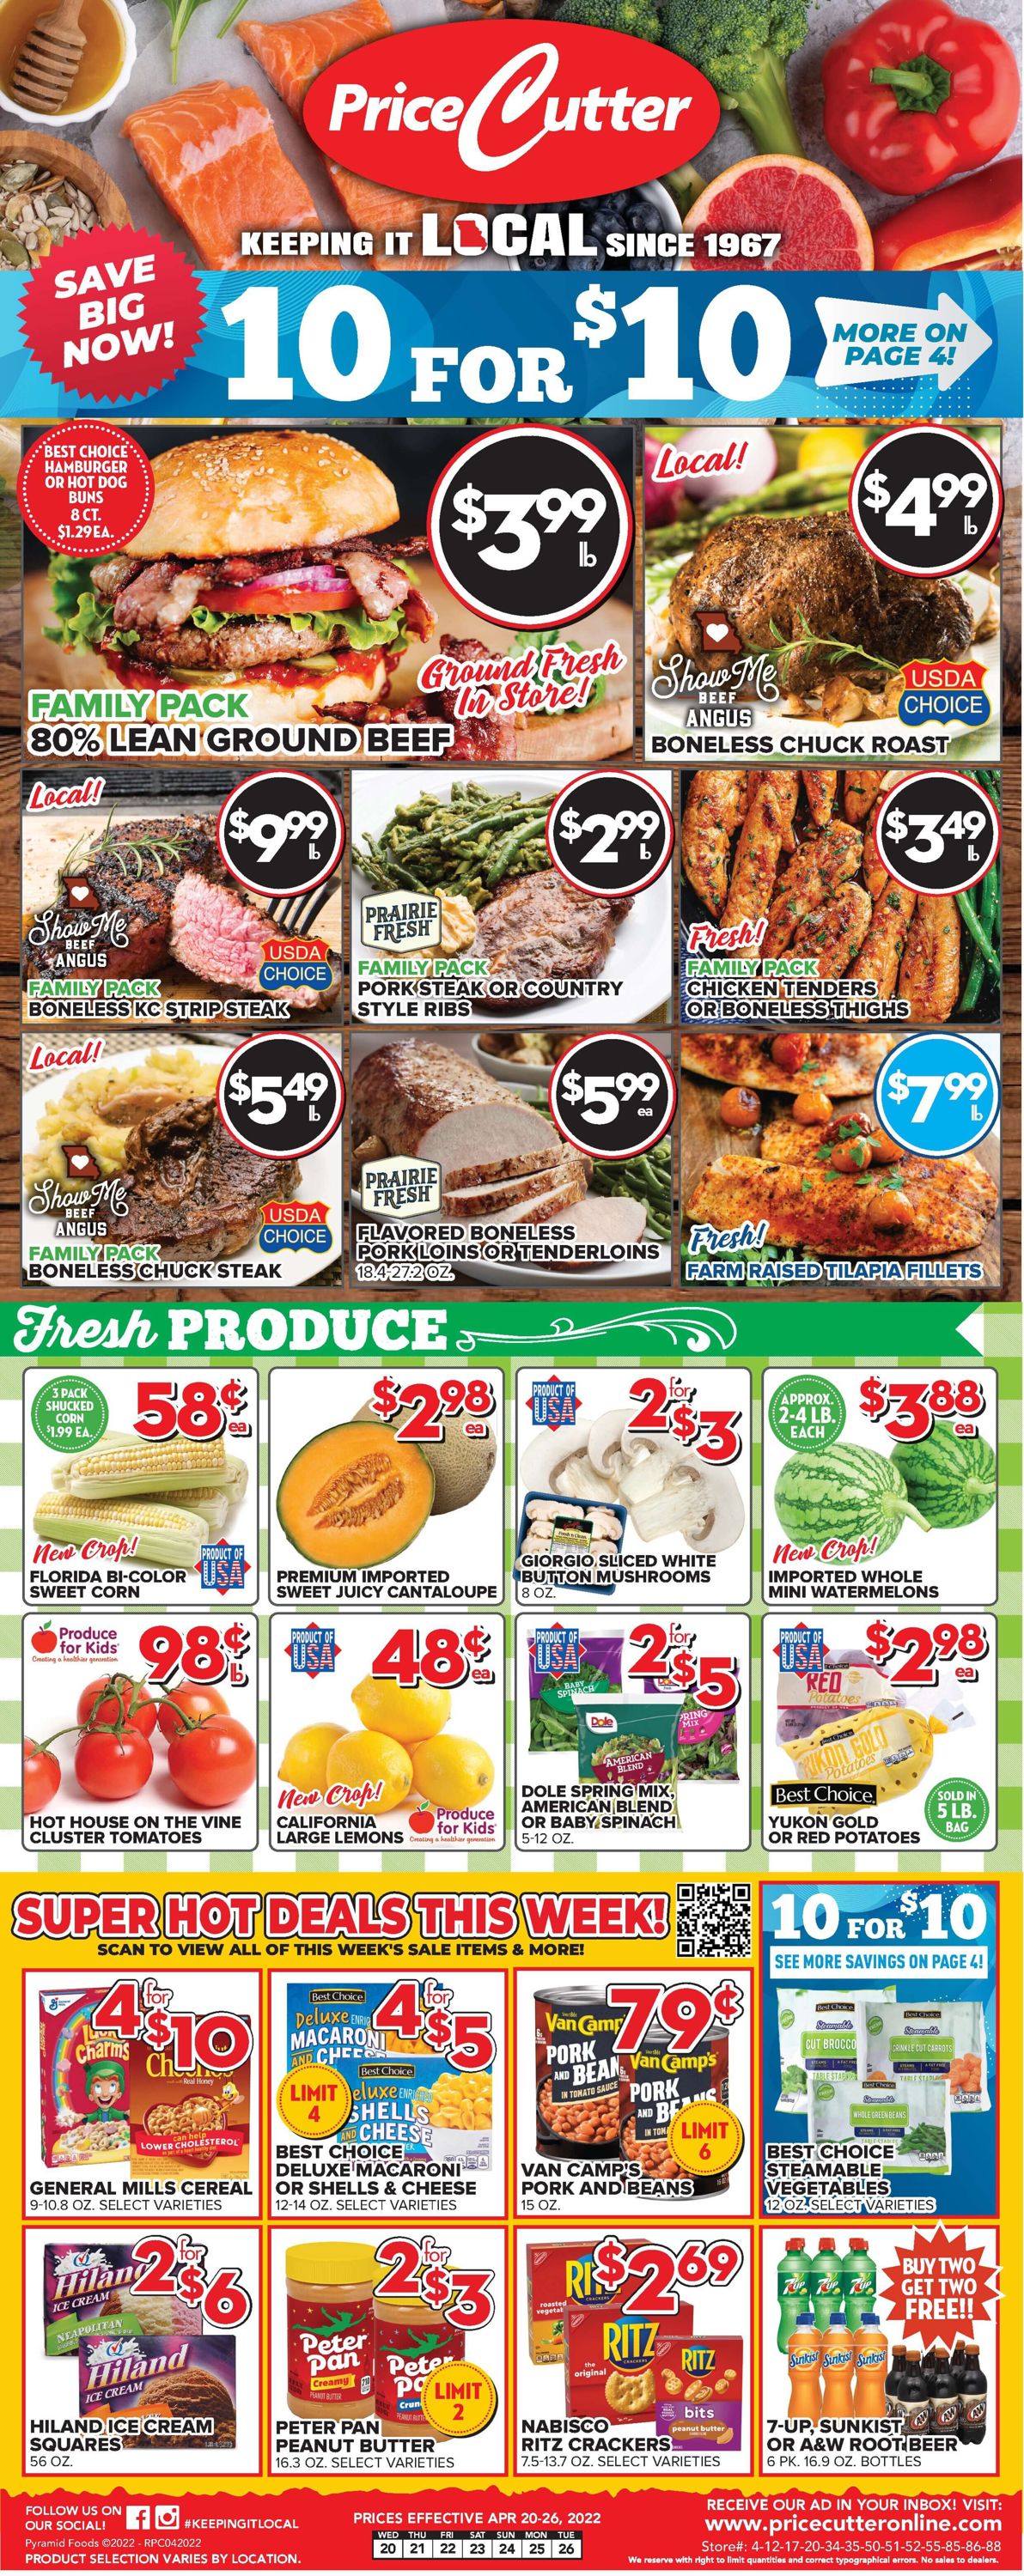 Price Cutter Weekly Ad Circular - valid 04/20-04/26/2022